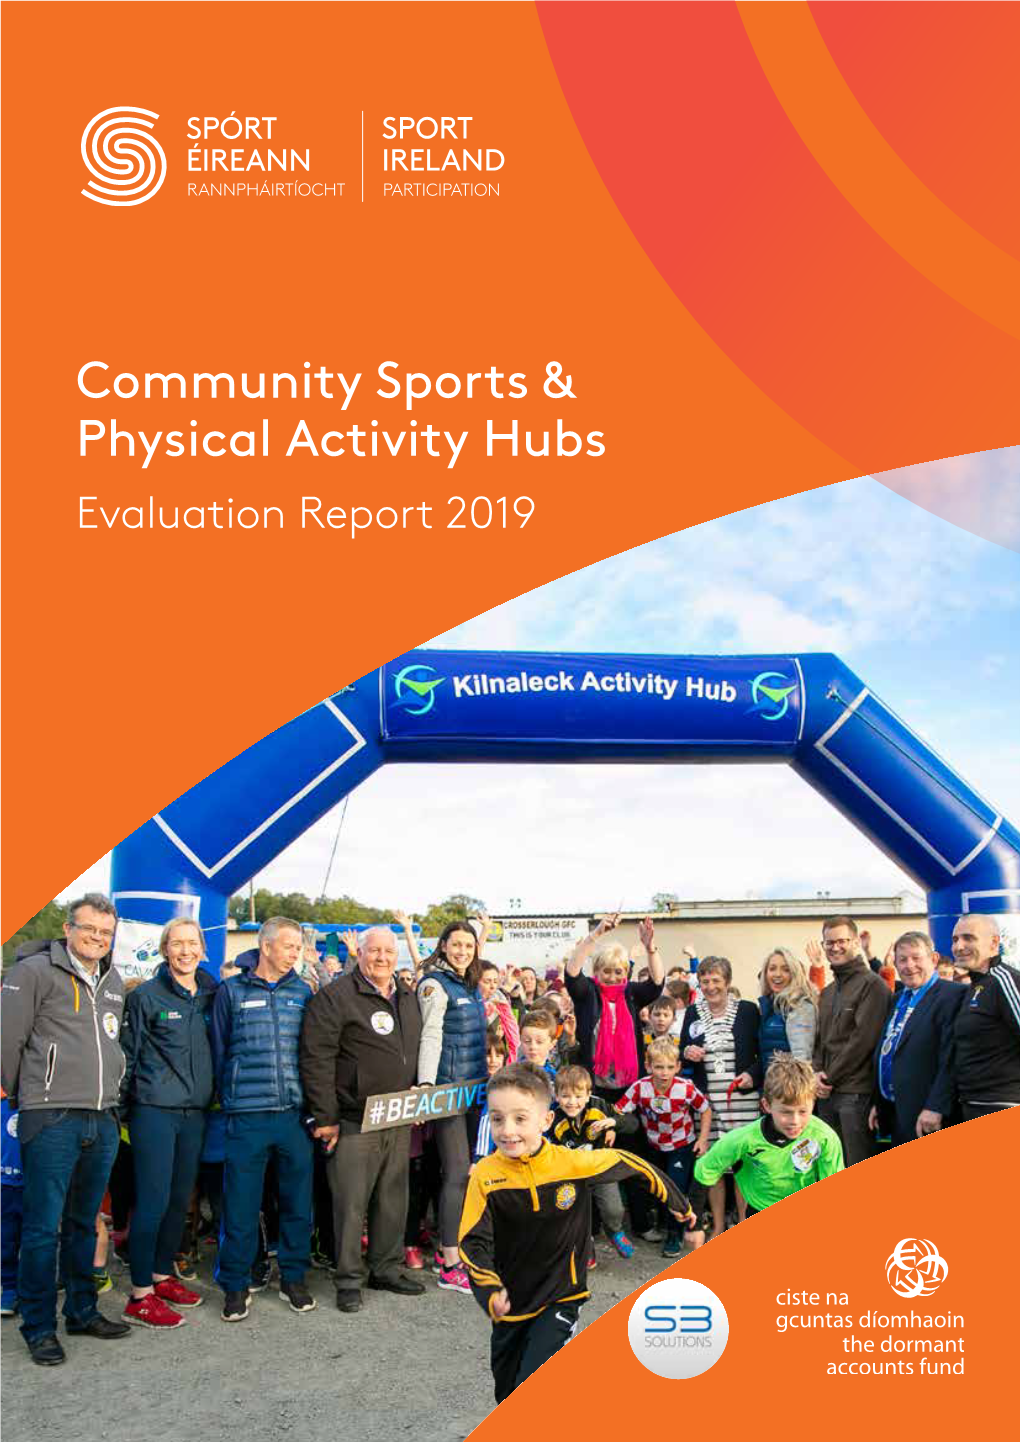 Community Sports & Physical Activity Hubs